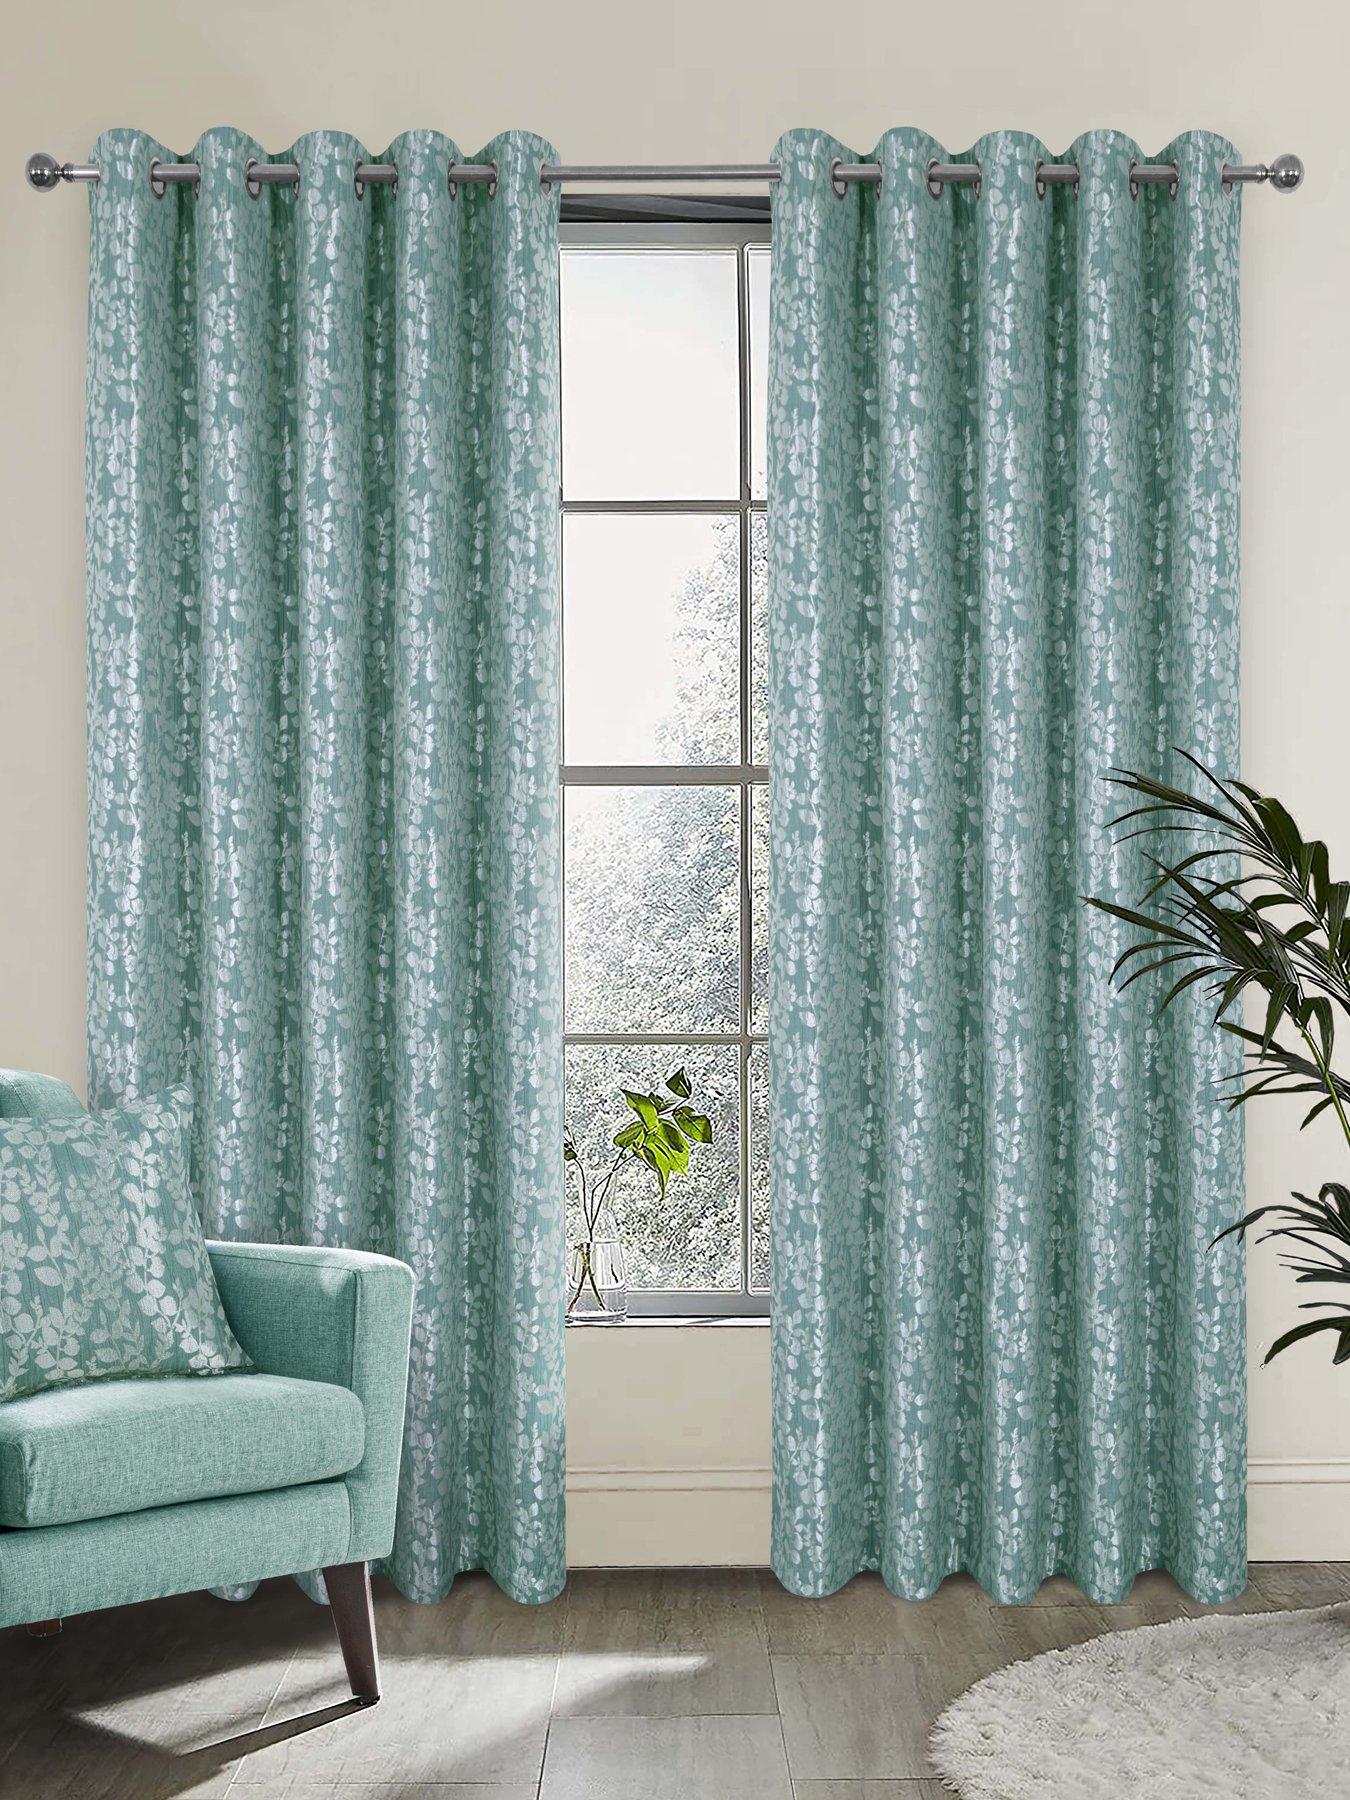 Woven Thermal Blackout Curtains